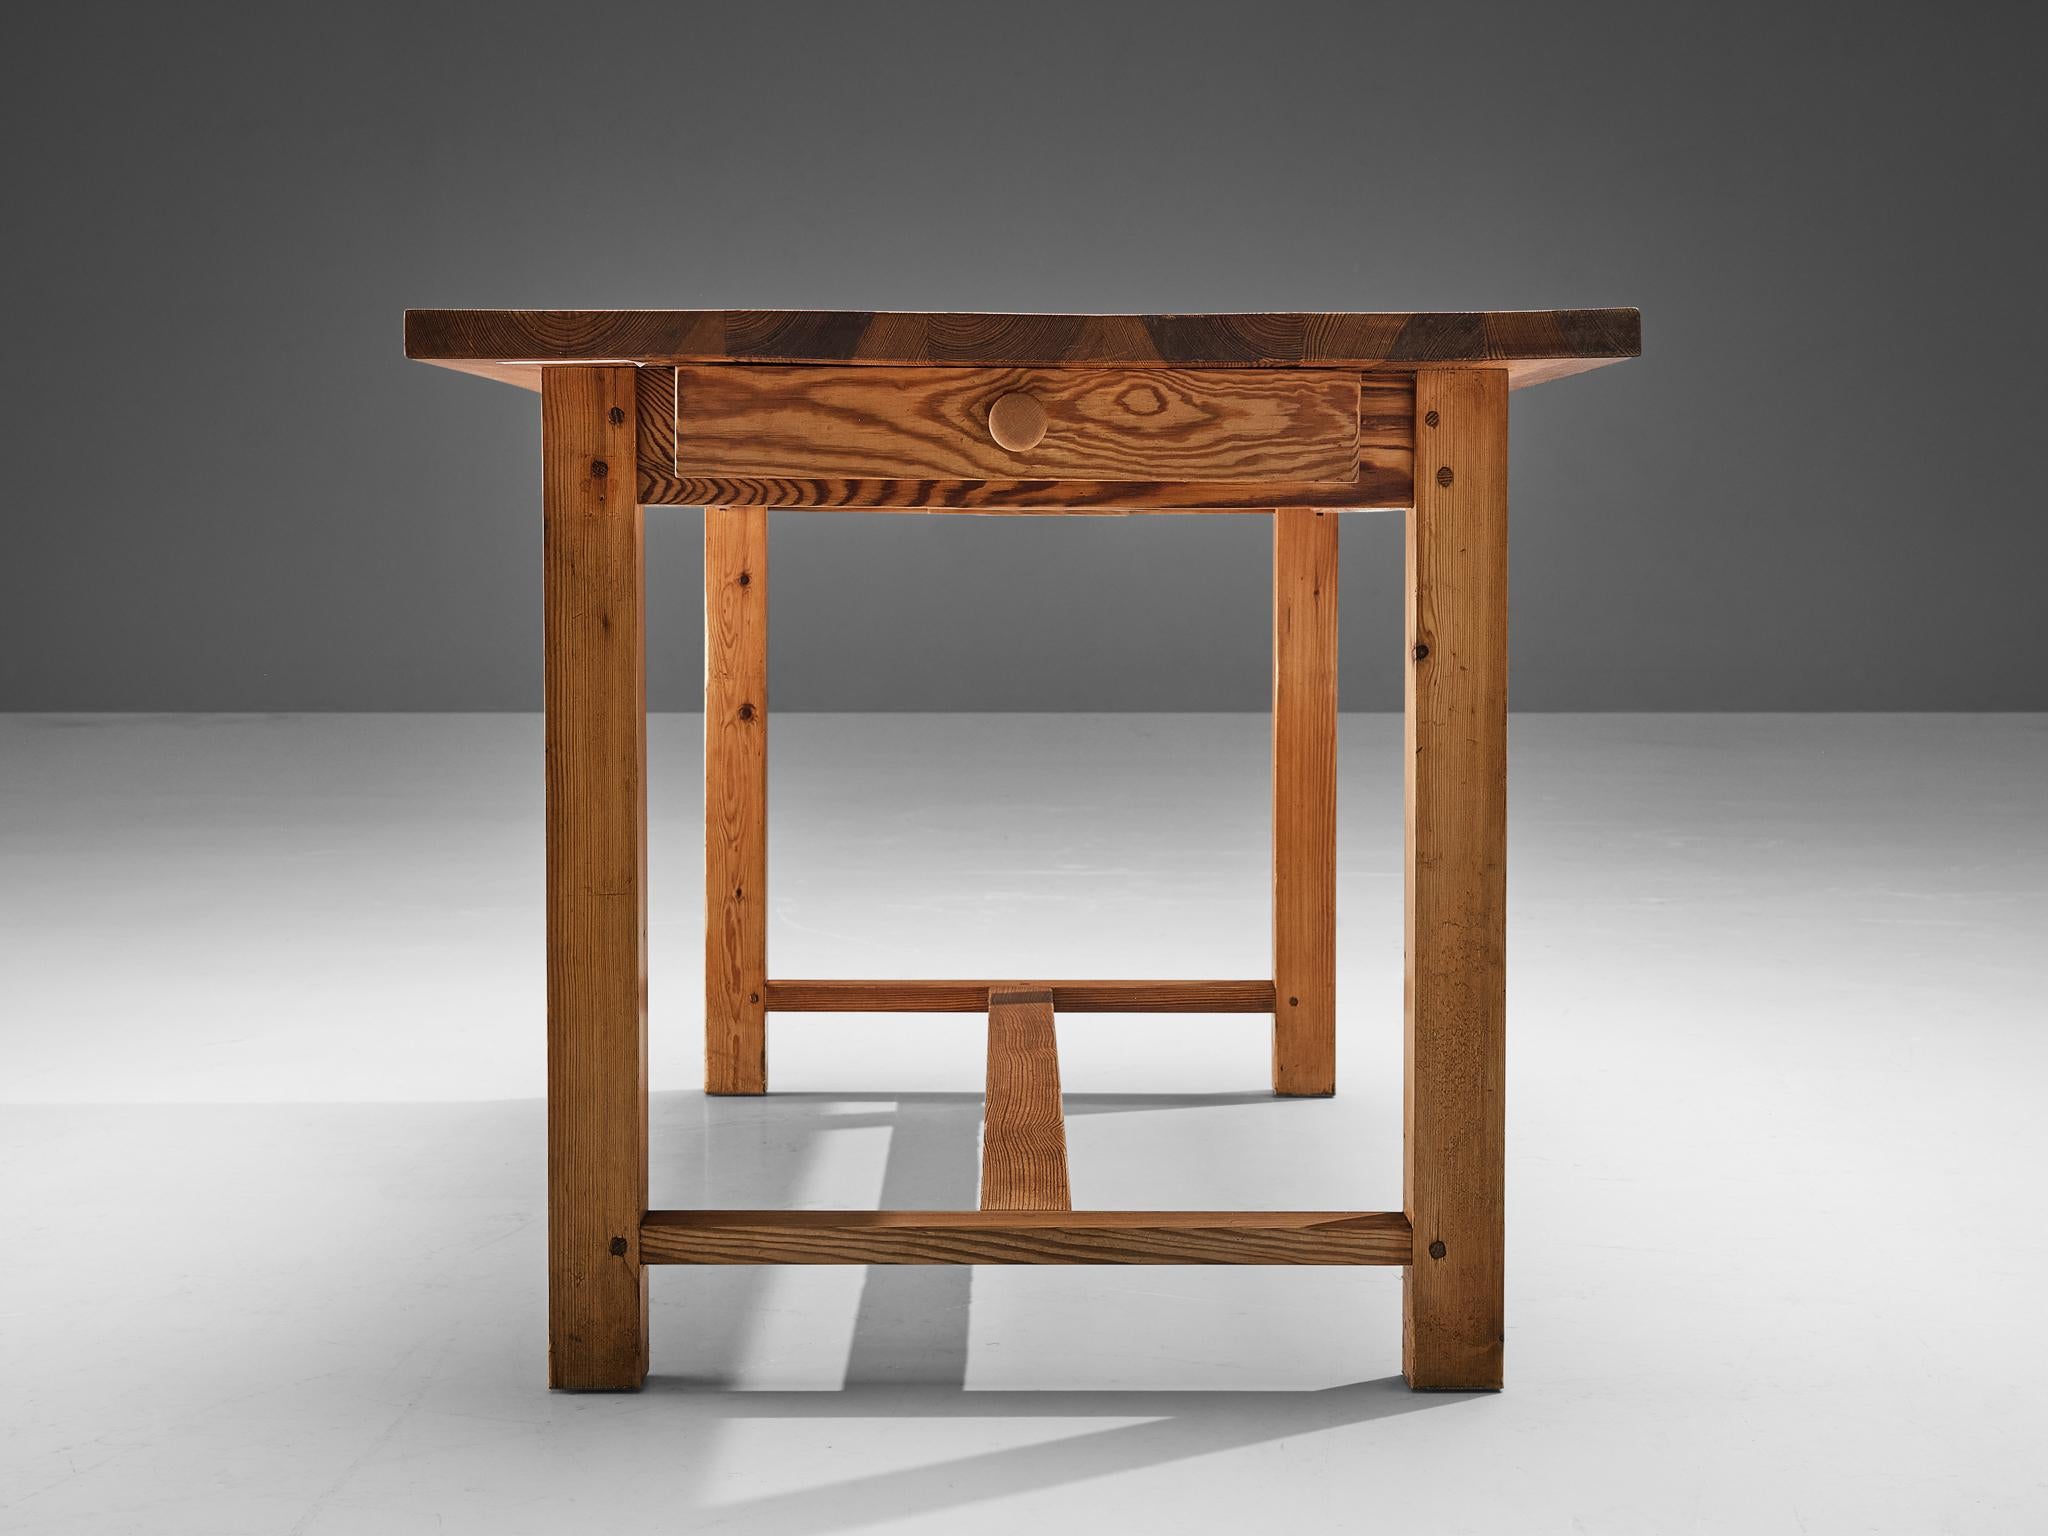 Writing desk, pine, France, 1960s 

This writing desk of French origin has a splendid construction that epitomizes a simplistic, natural and timeless aesthetic. The design is characterized by clear, straight lines and sharp edges, which are